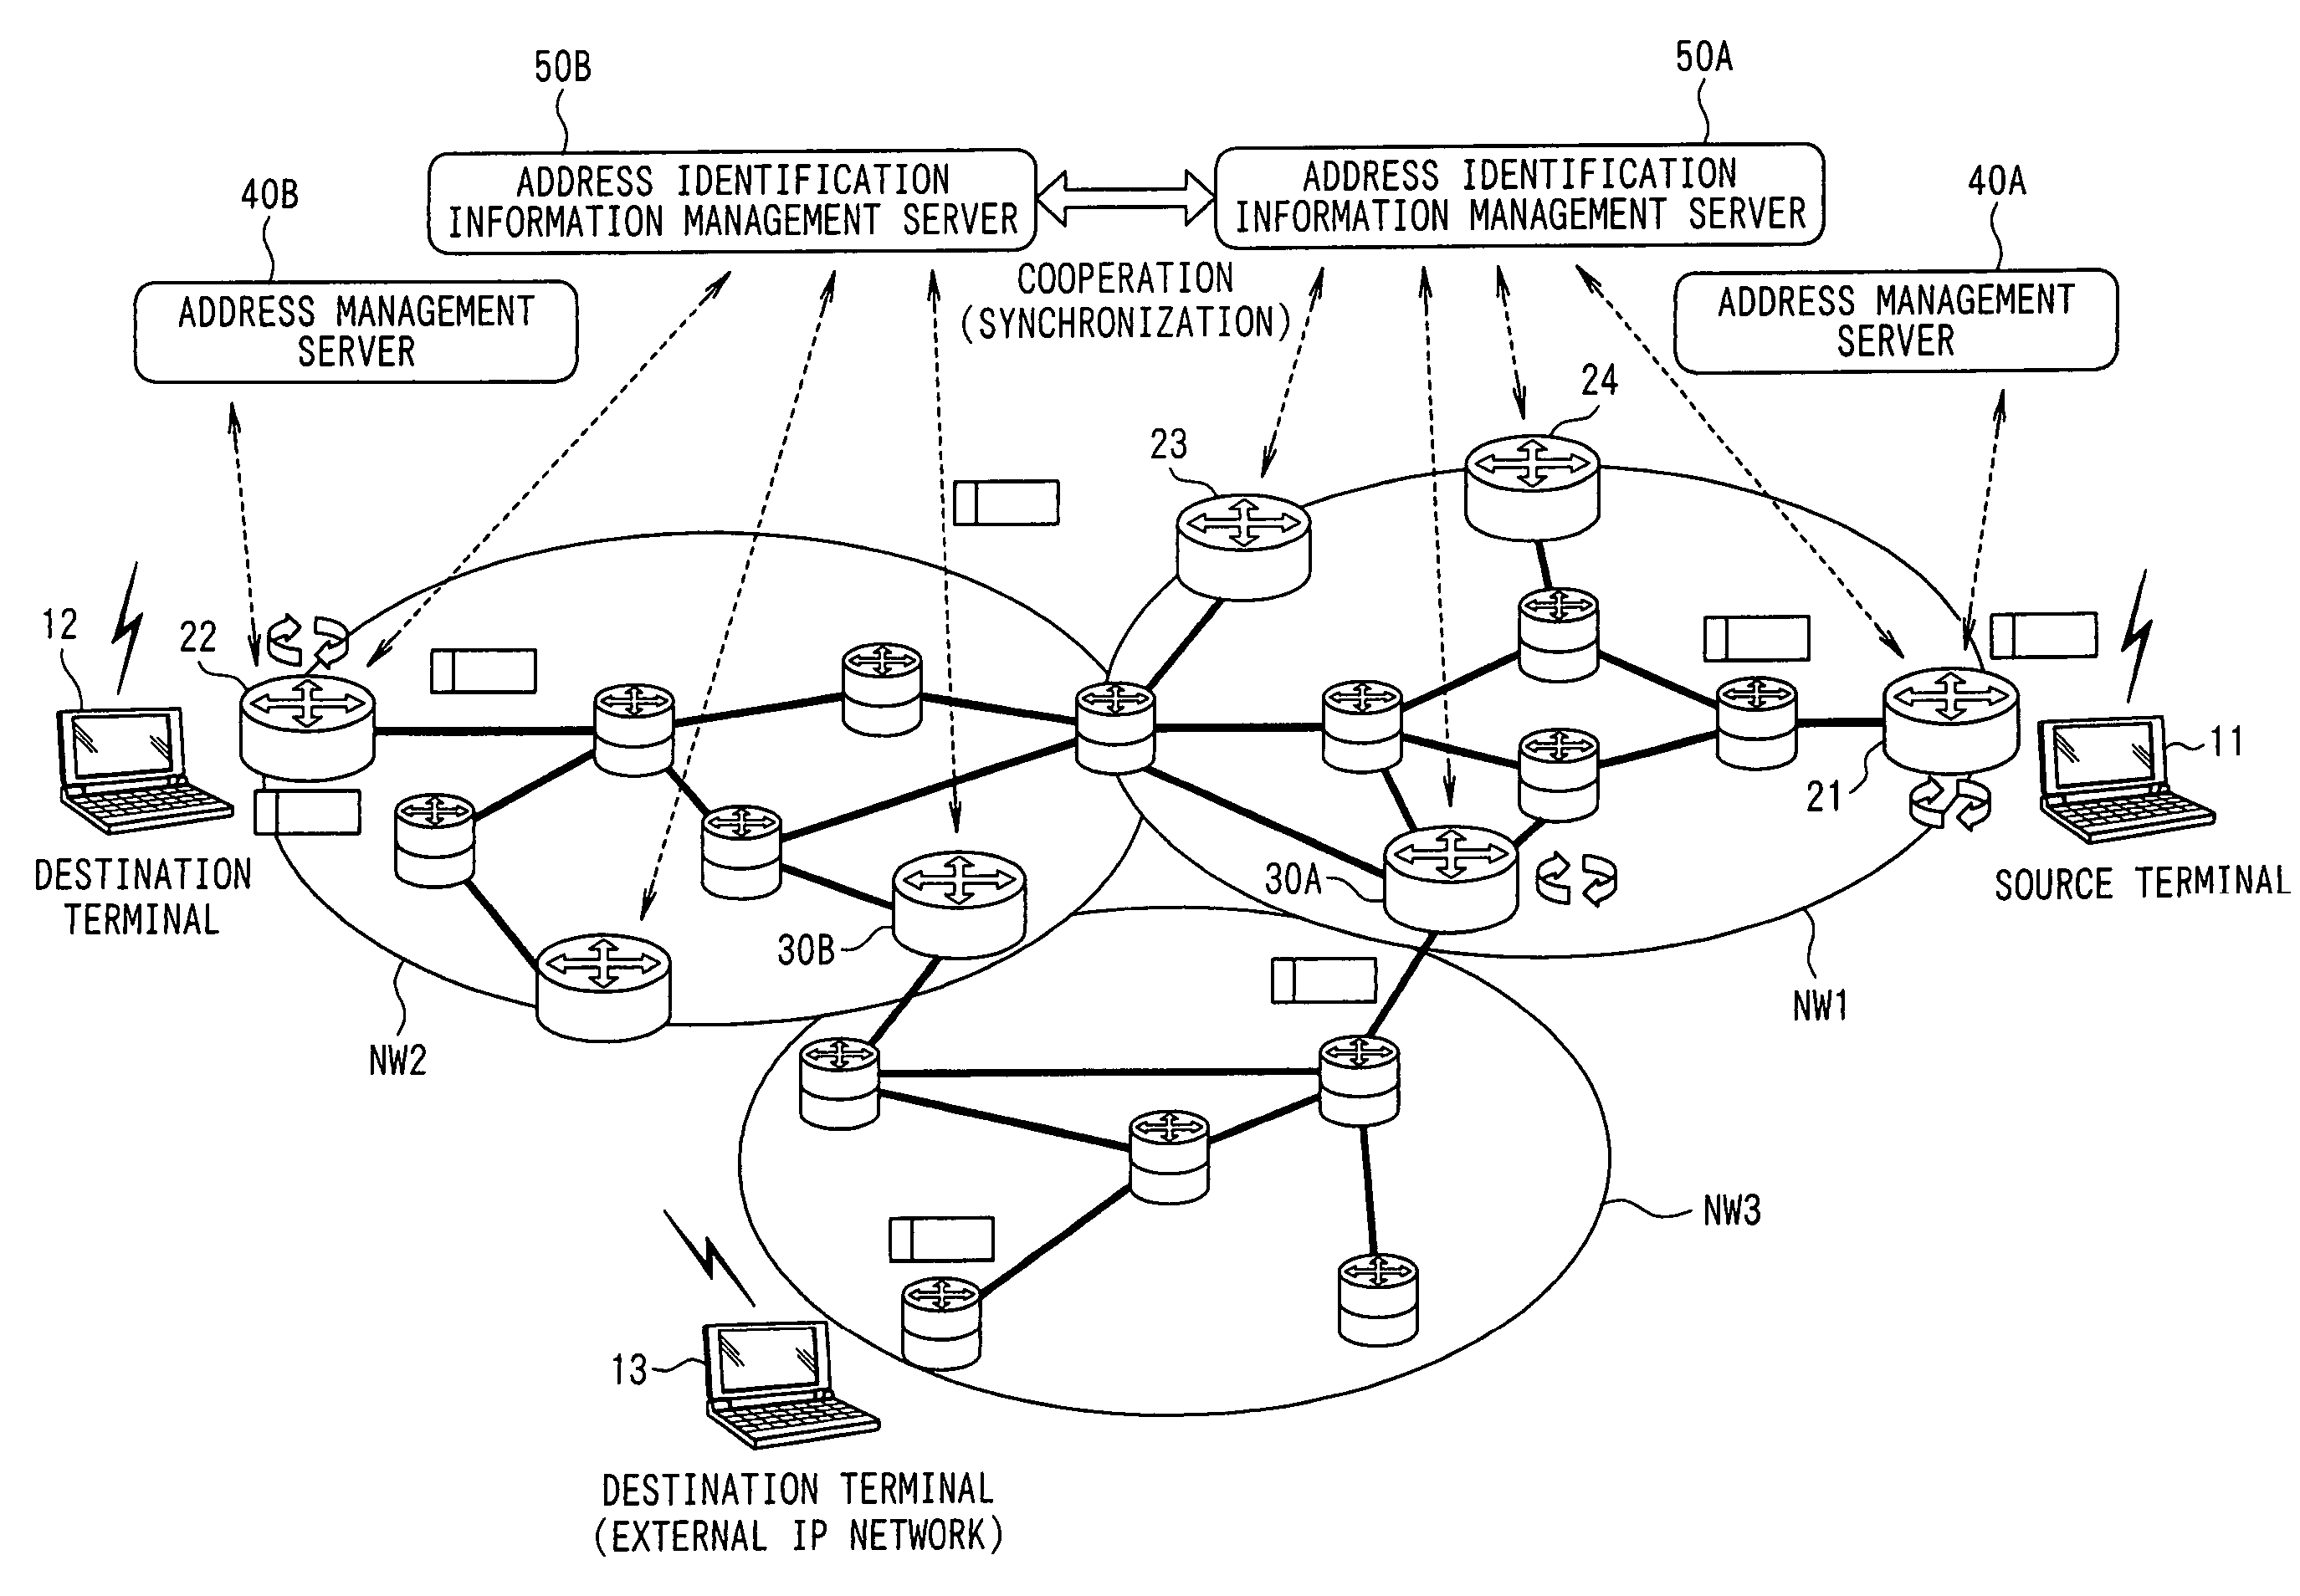 Router and address identification information management server